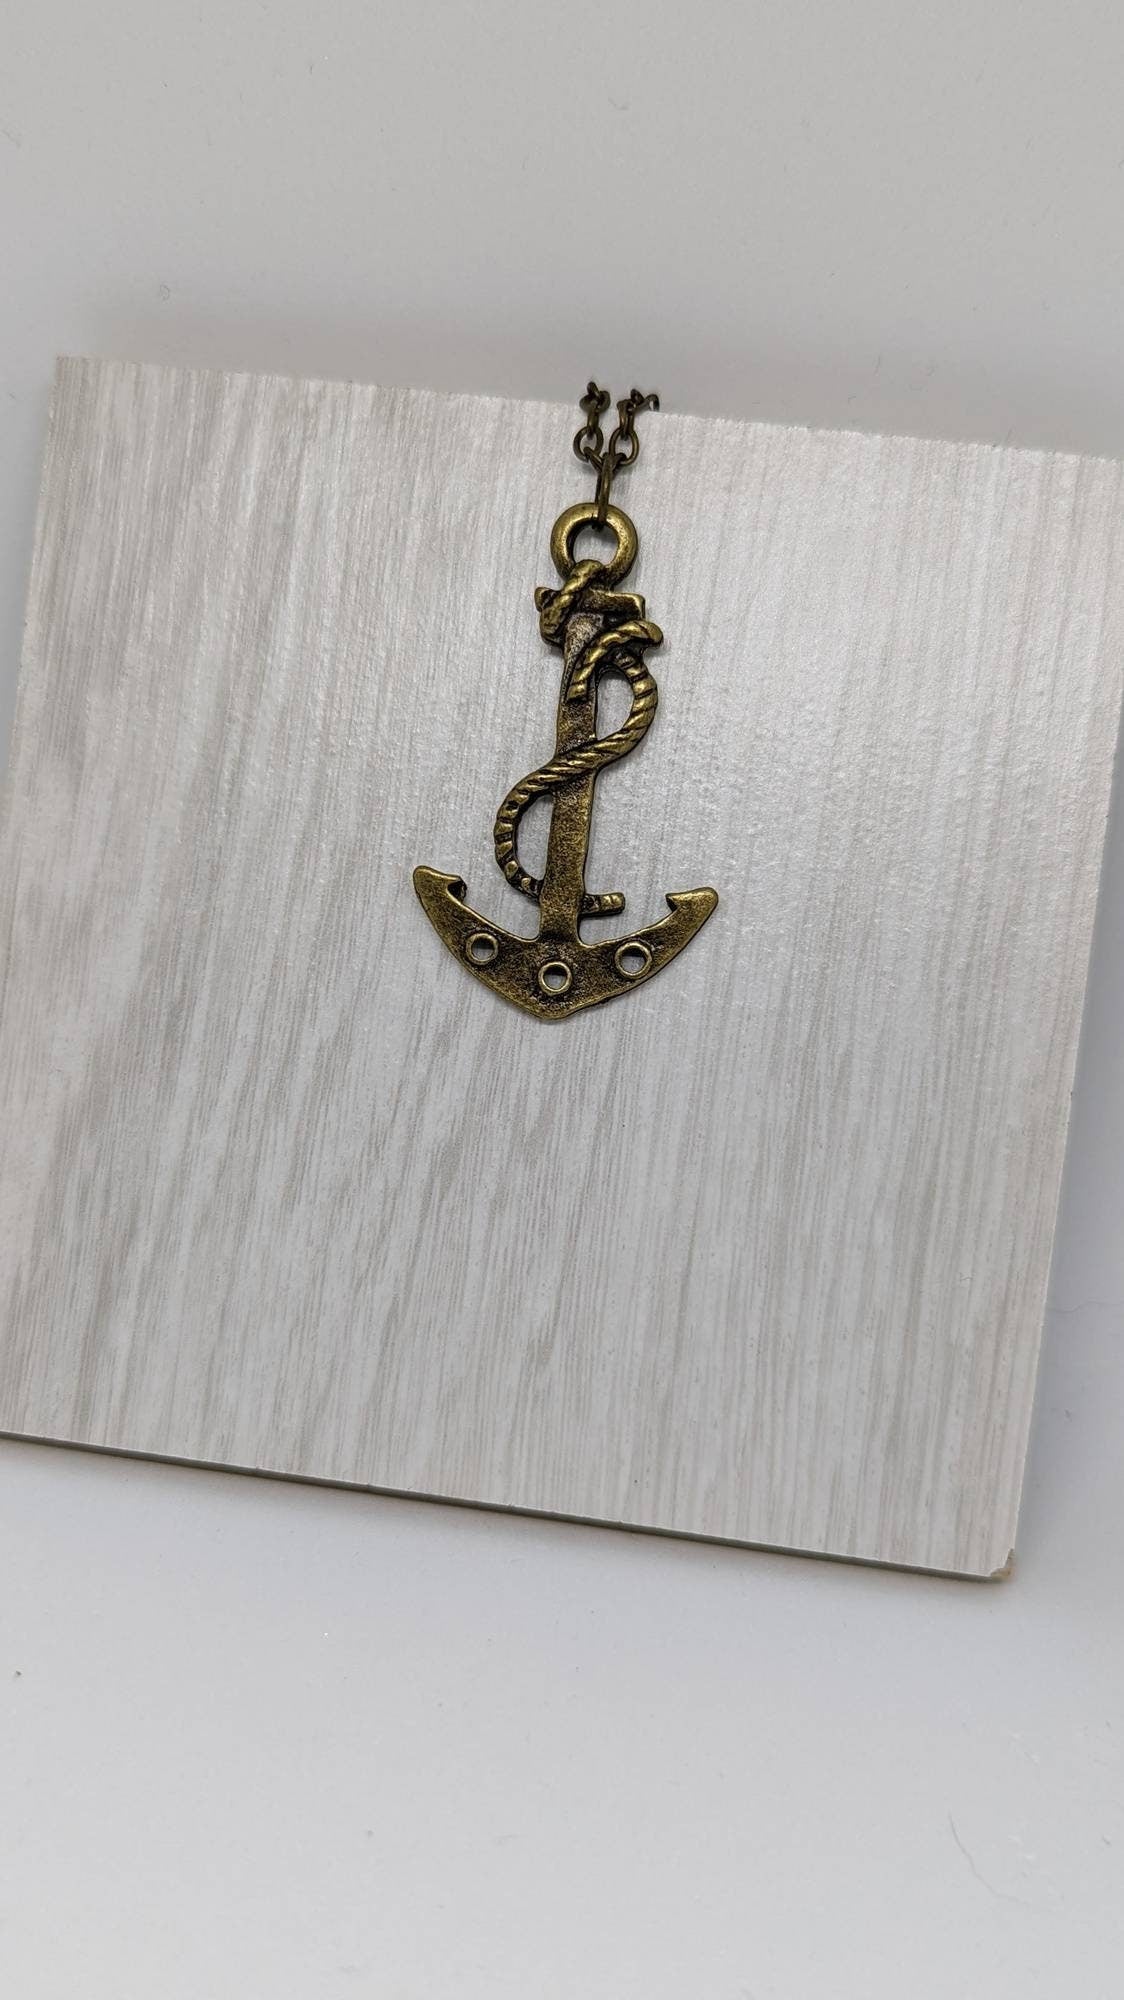 Anchor necklace, nautical necklace, bronze anchor, anchor pendant, gift for her, nautical jewelry, anchor charm, anchor jewelery